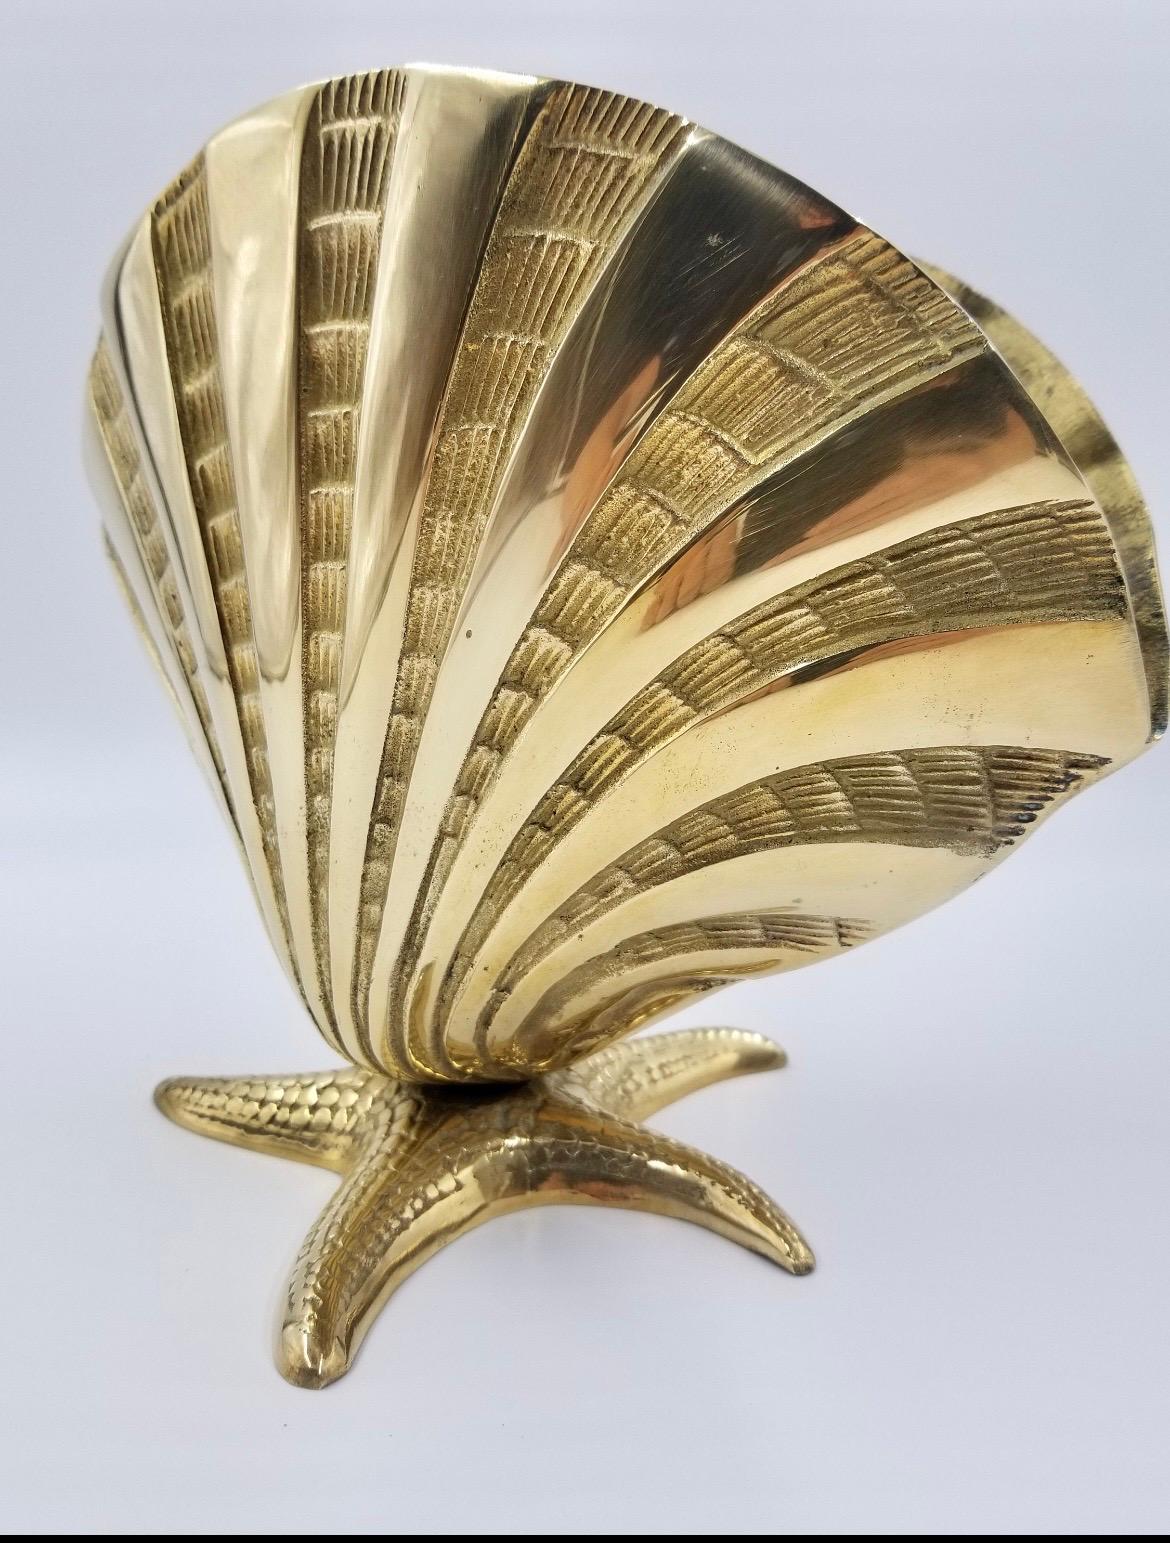 Large brass sea shell nautilus planter on starfish base. Very unusual design with nice detail. Overall nice condition. Ready for your beach house!